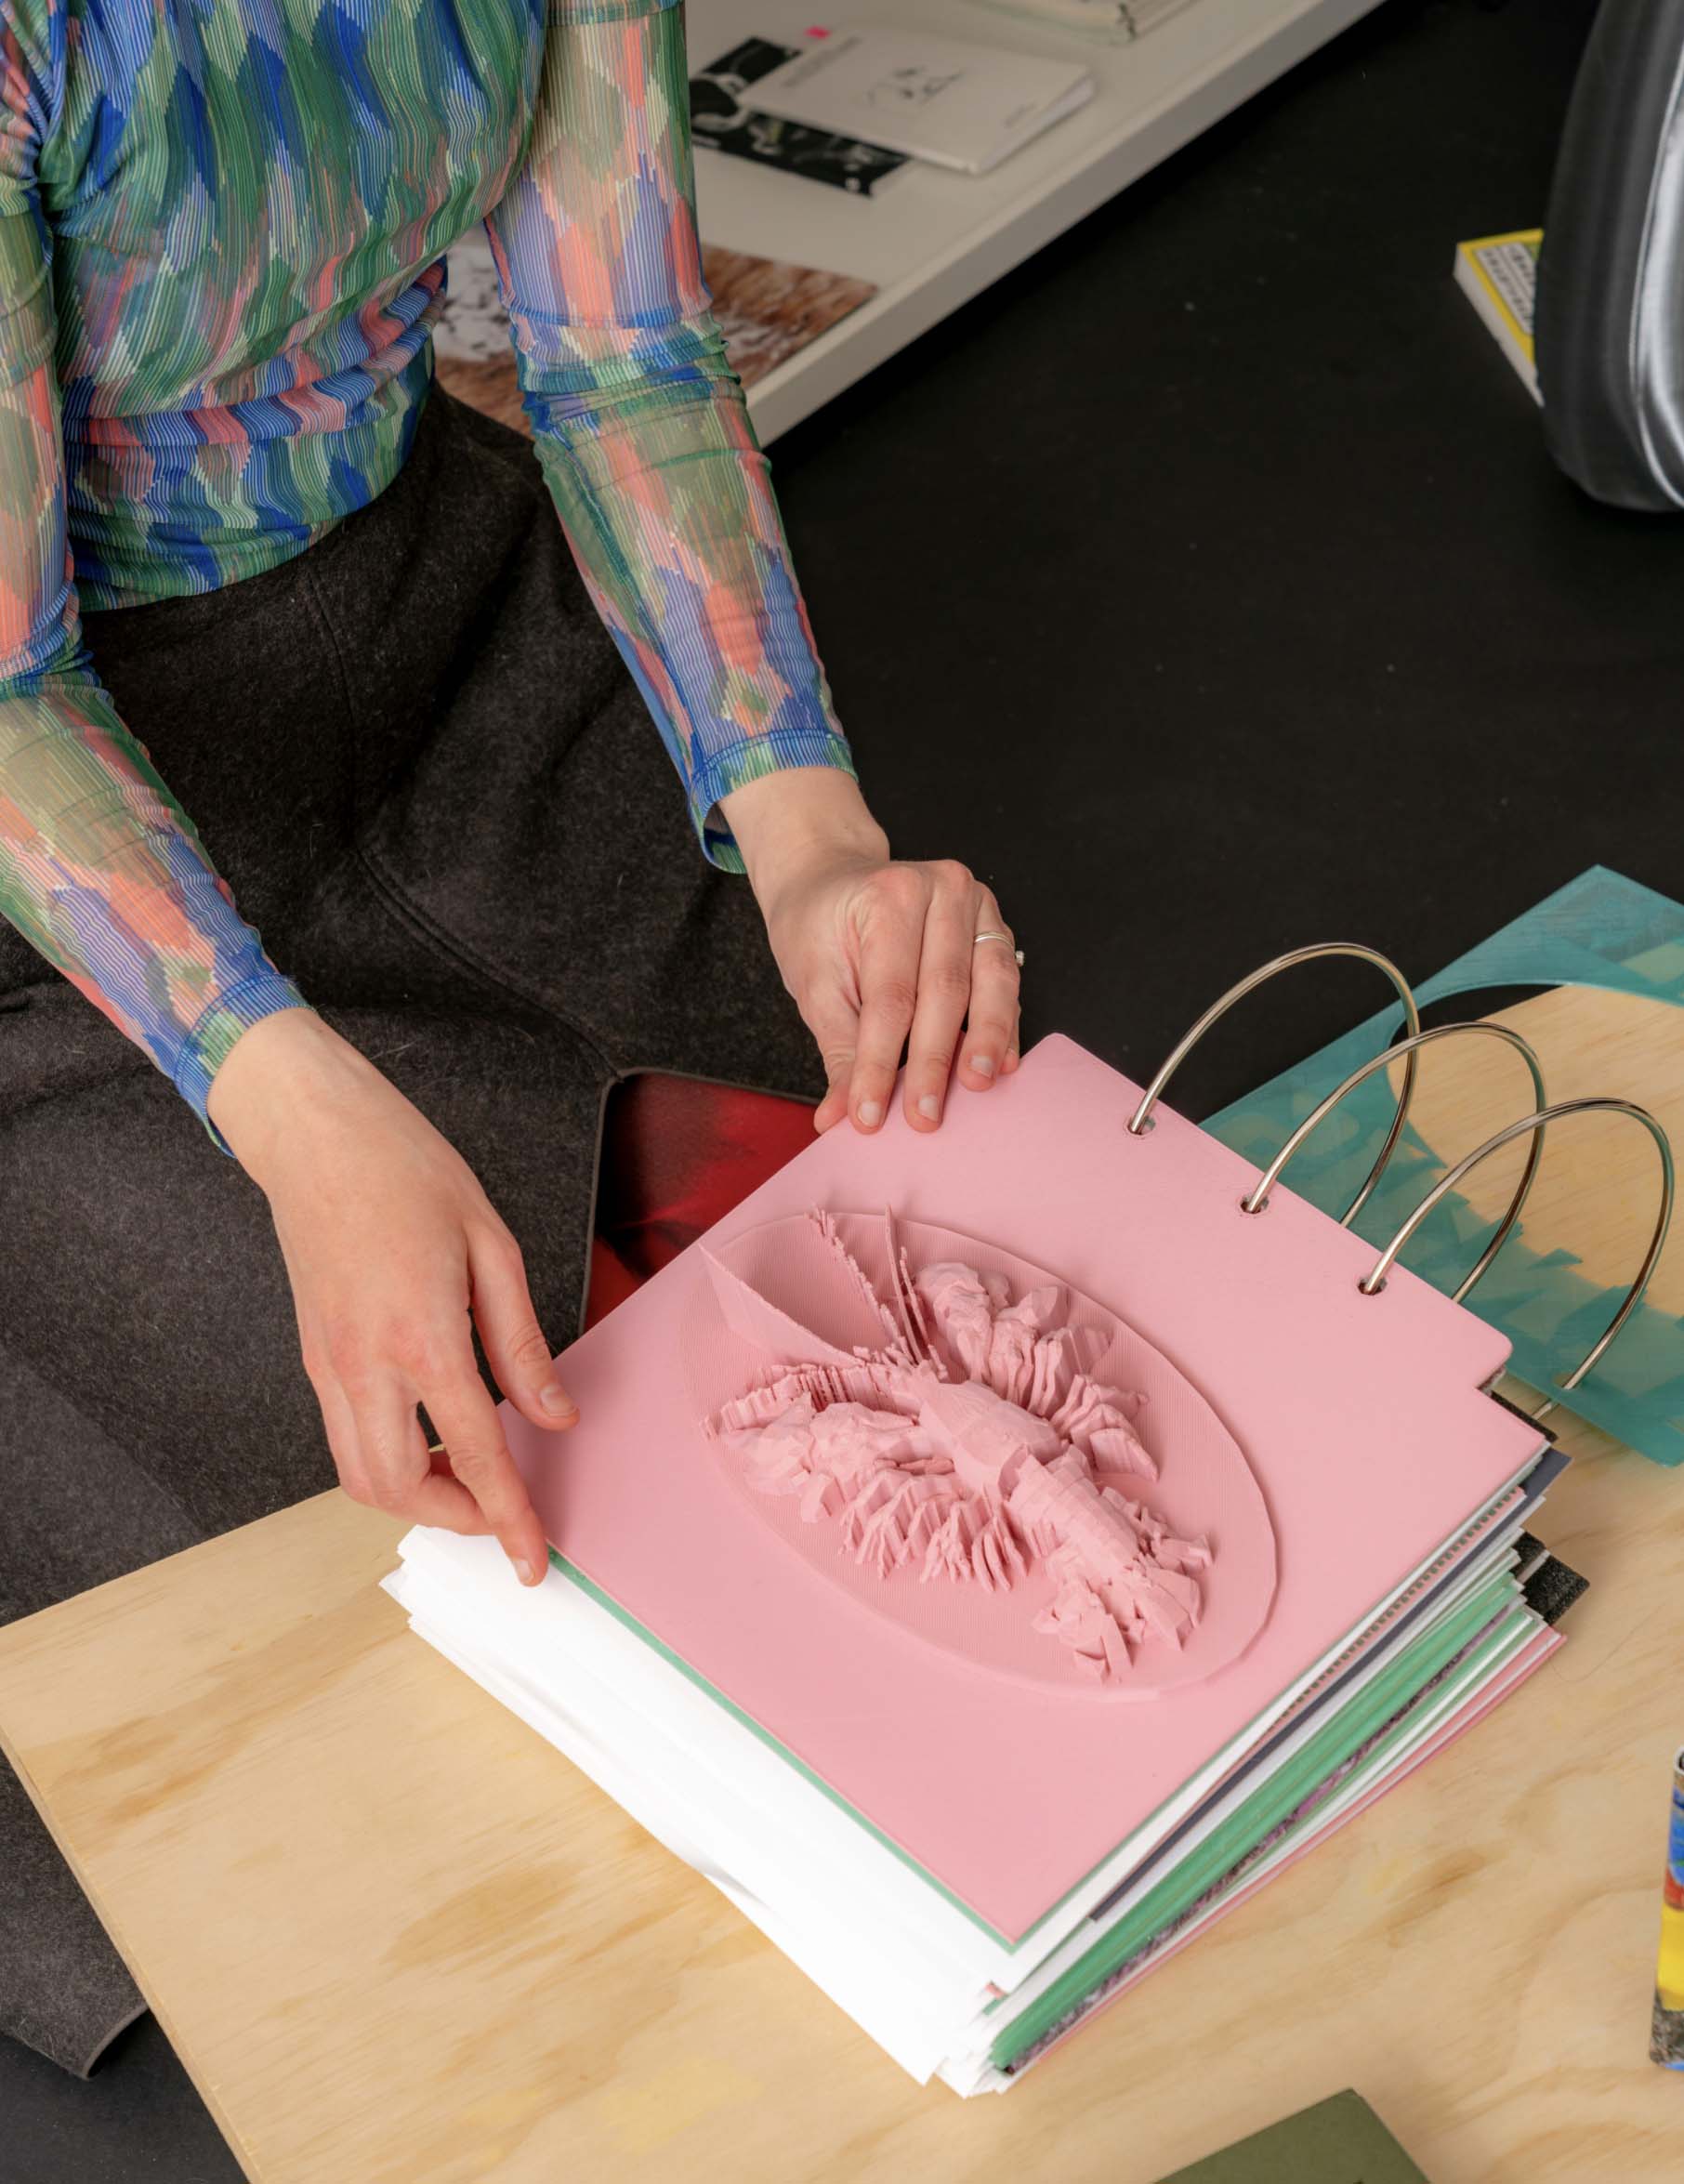 Photo of a person holding a 3D printed book page that is depicting a crawfish. The page is pink.